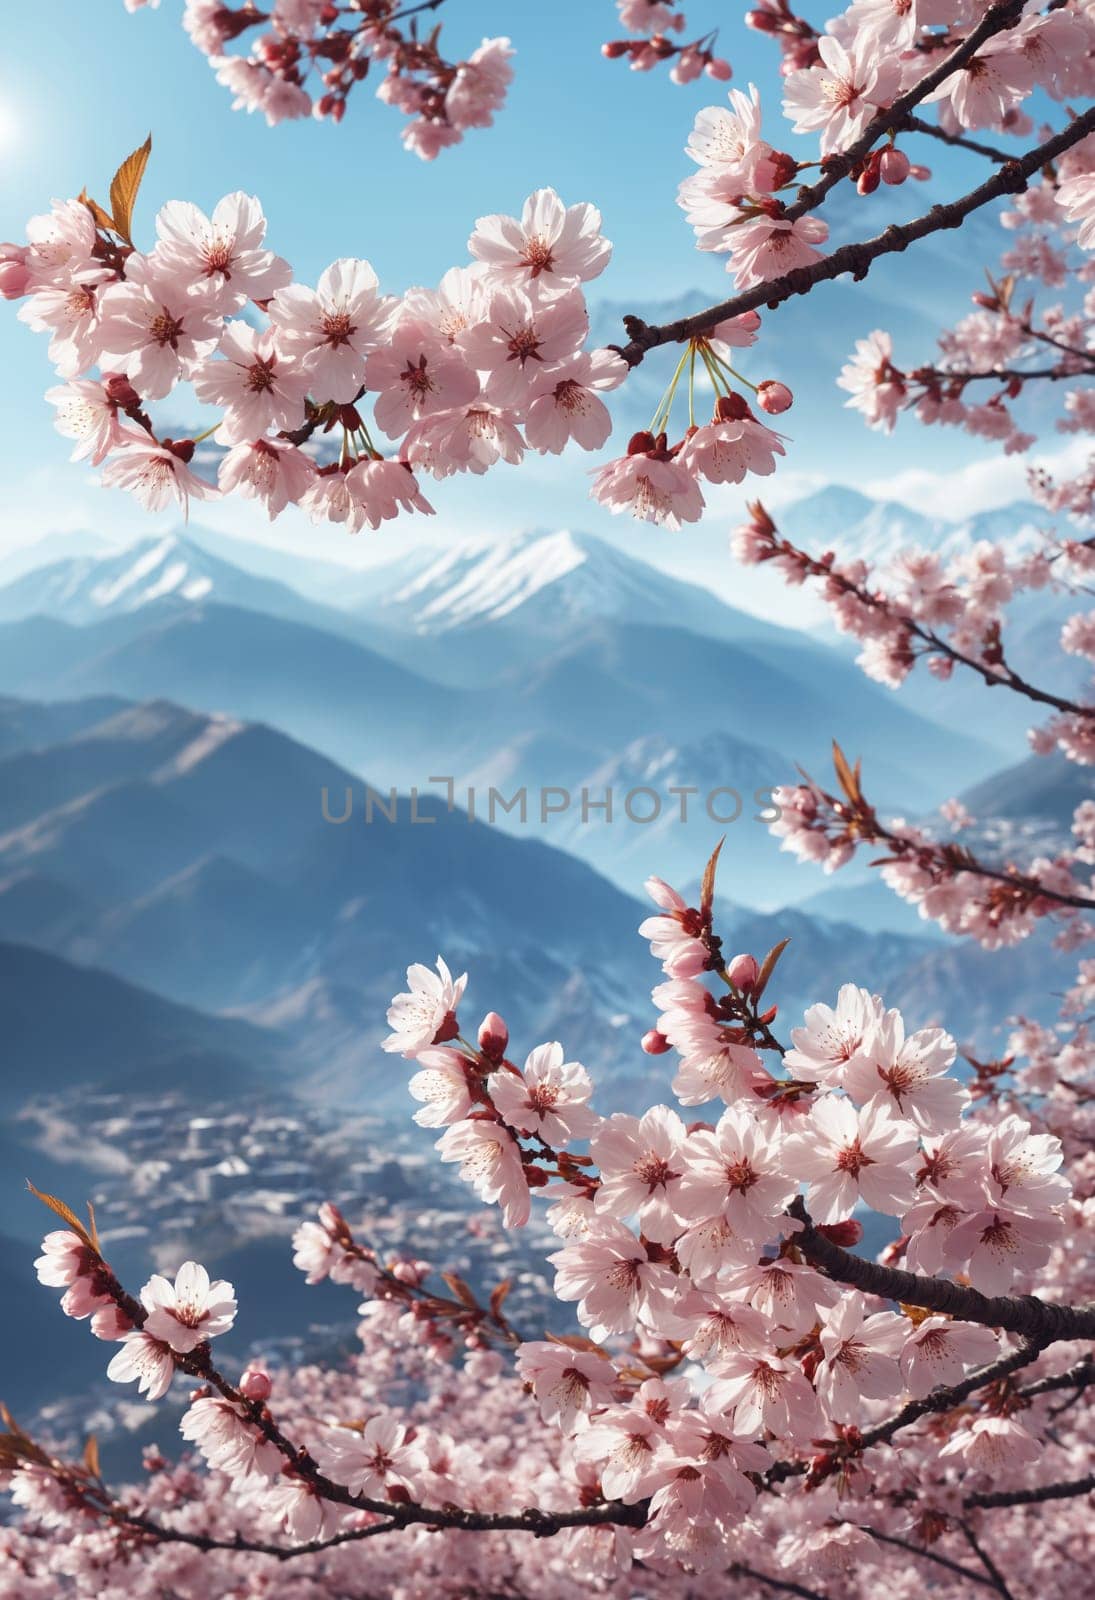 cherry blossom in spring time with blue sky and mountains background by Andre1ns